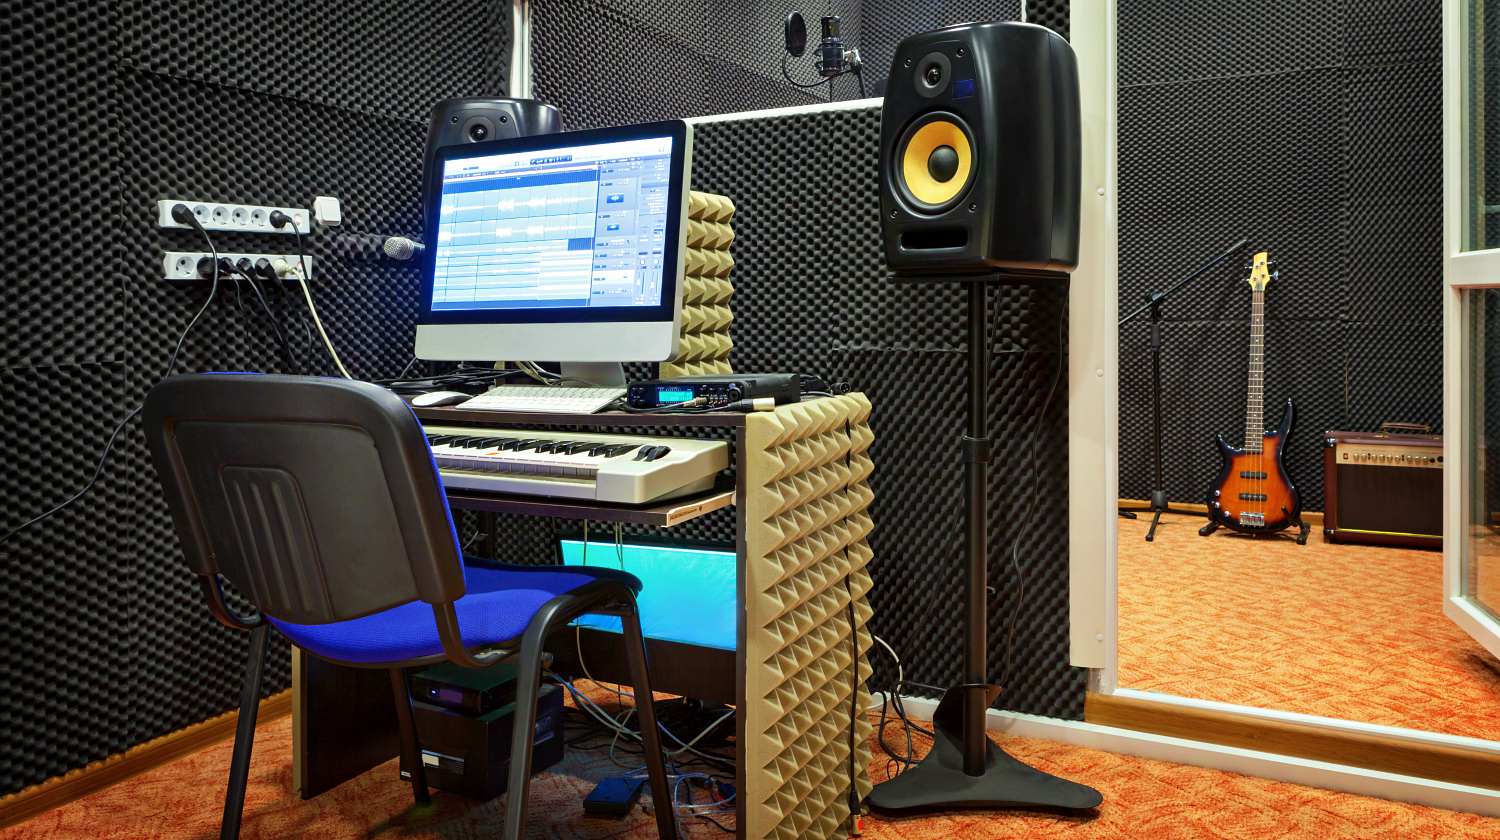 soundproofing diy studio sound soundproof space recording rhine joy projects august engineer